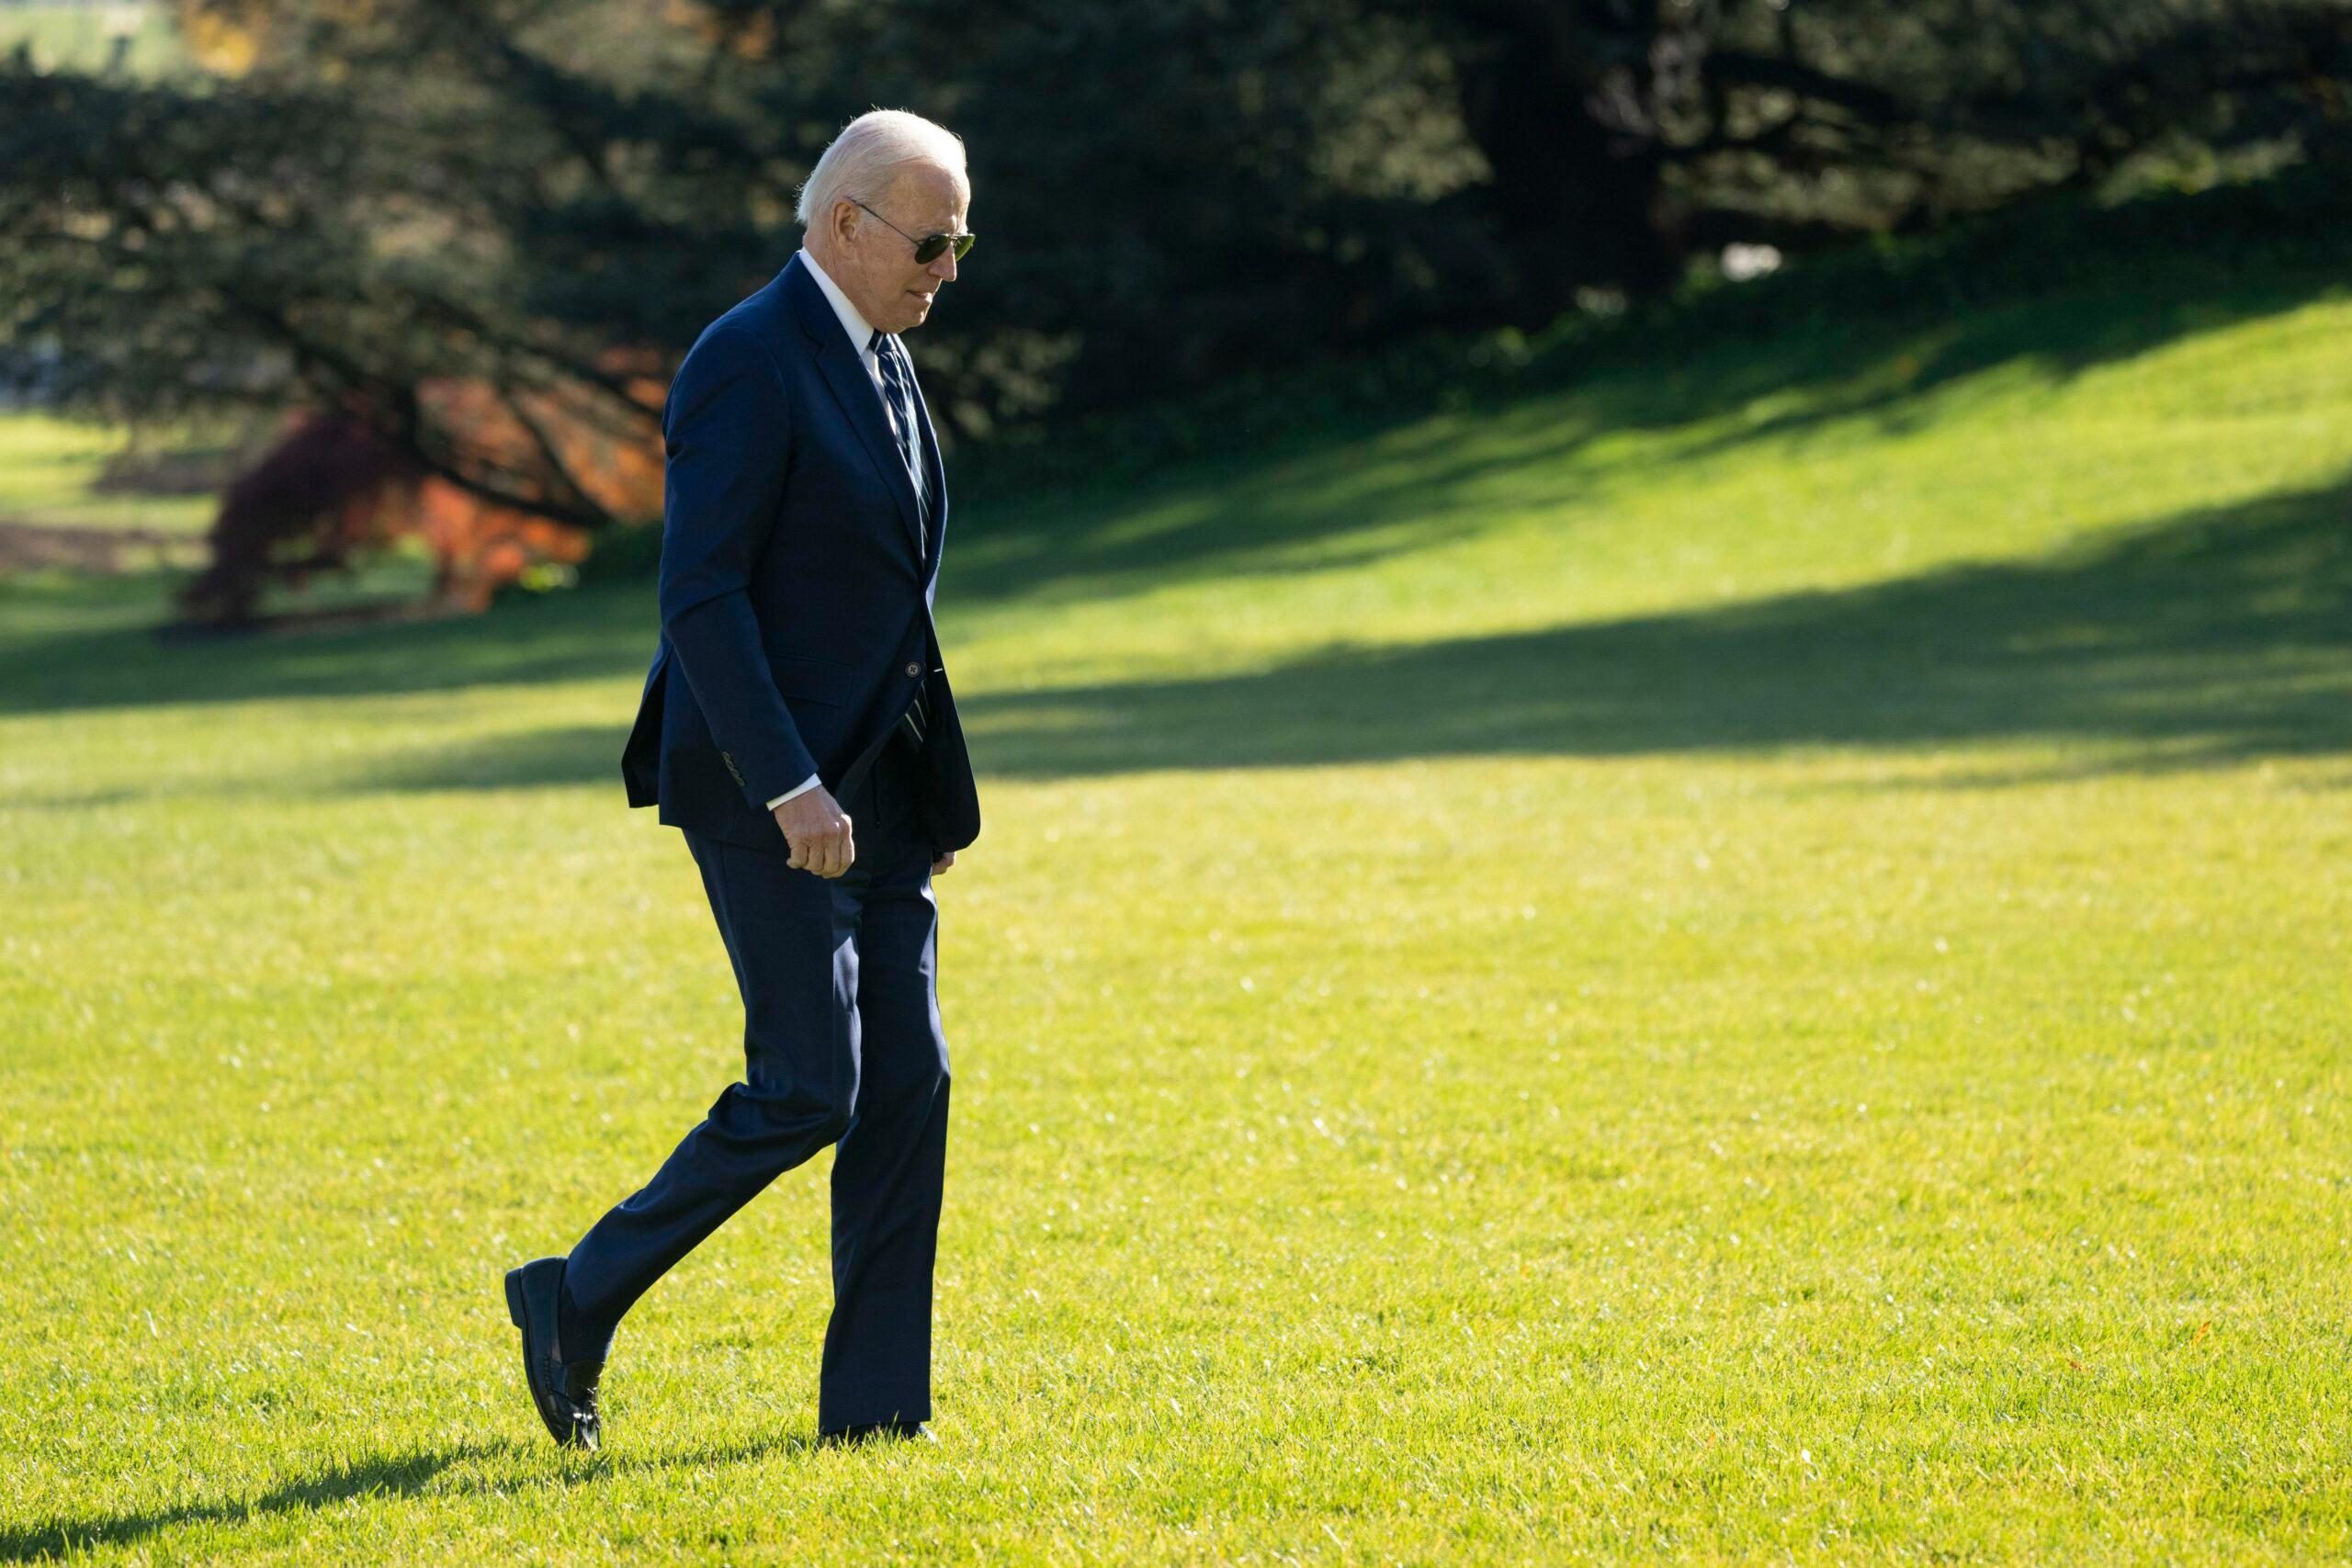 President Joe Biden returns to the White House after receiving a physical